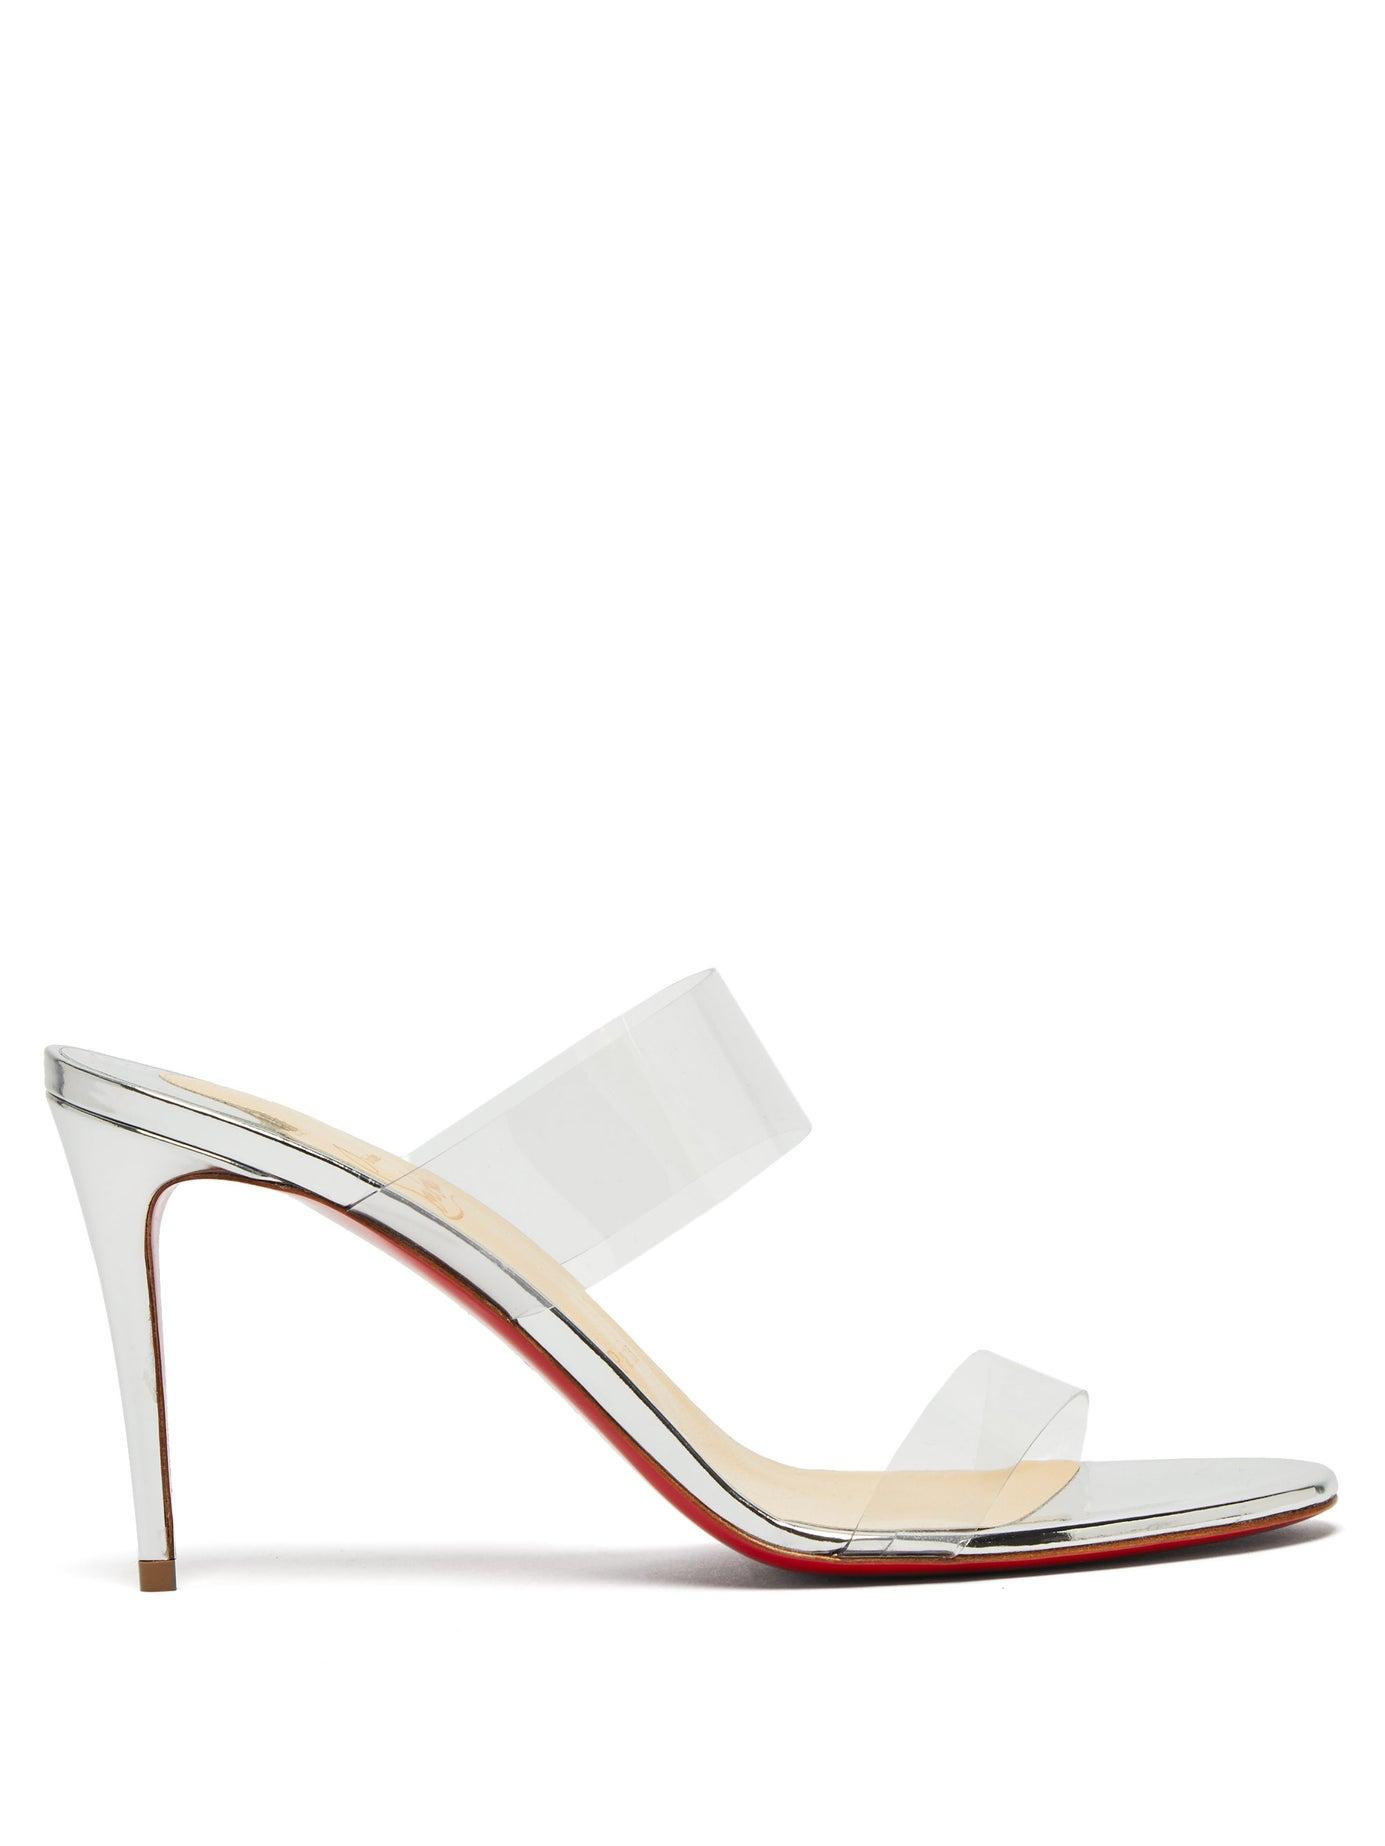 Christian Louboutin Just Nothing 85 Plexi-strap Leather Sandals in 